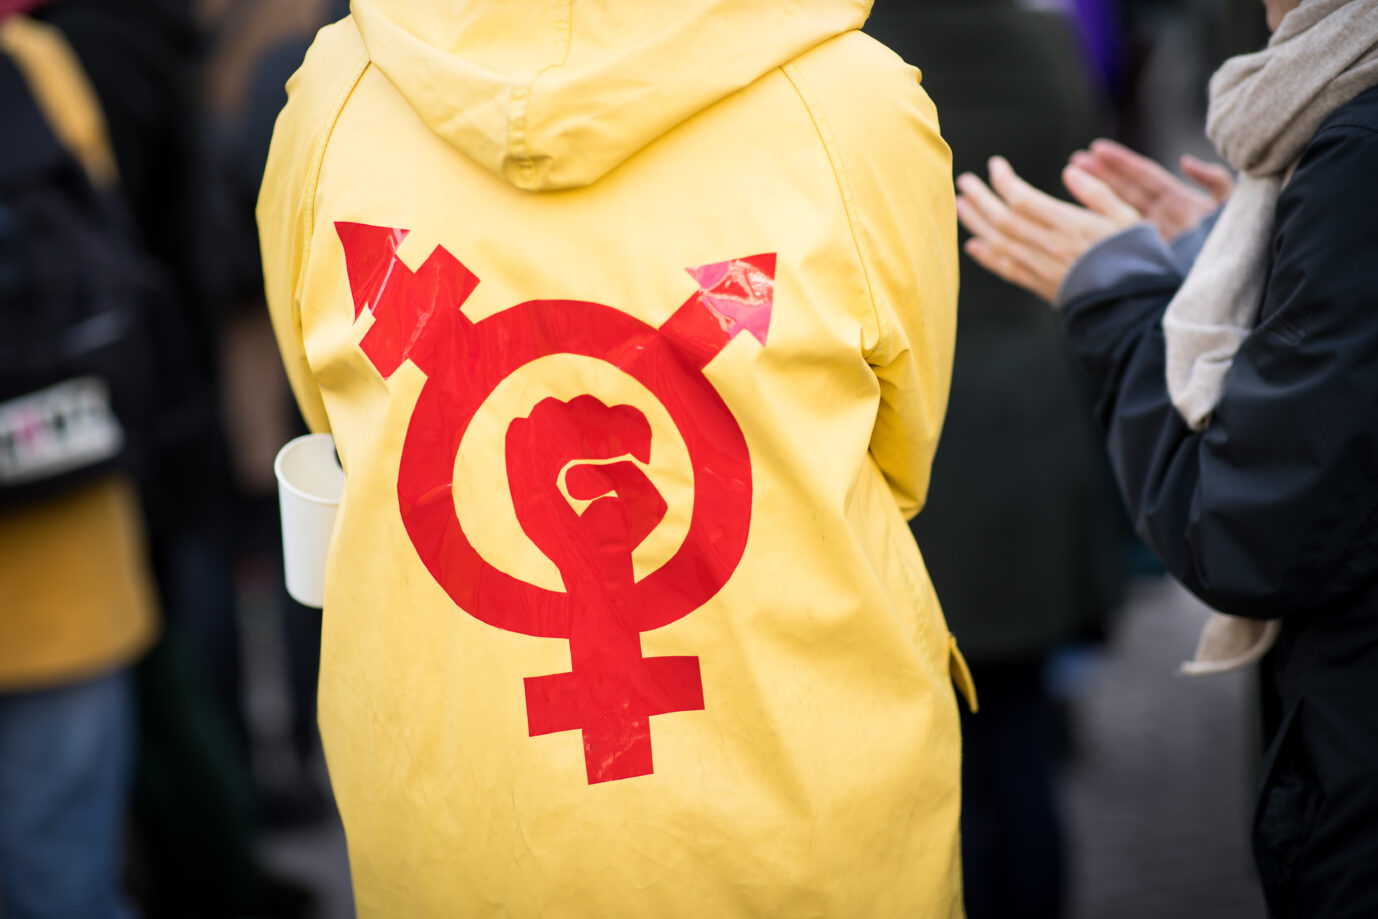 08 March 2019, Hamburg: A woman wears a yellow raincoat with a gender and protest symbol at a rally for International Women's Day in front of the City Hall. Parties, unions, and women's rights organizations have called for a rally for more equality in front of the Hamburg City Hall on World Women's Day. Photo: Christian Charisius/dpa